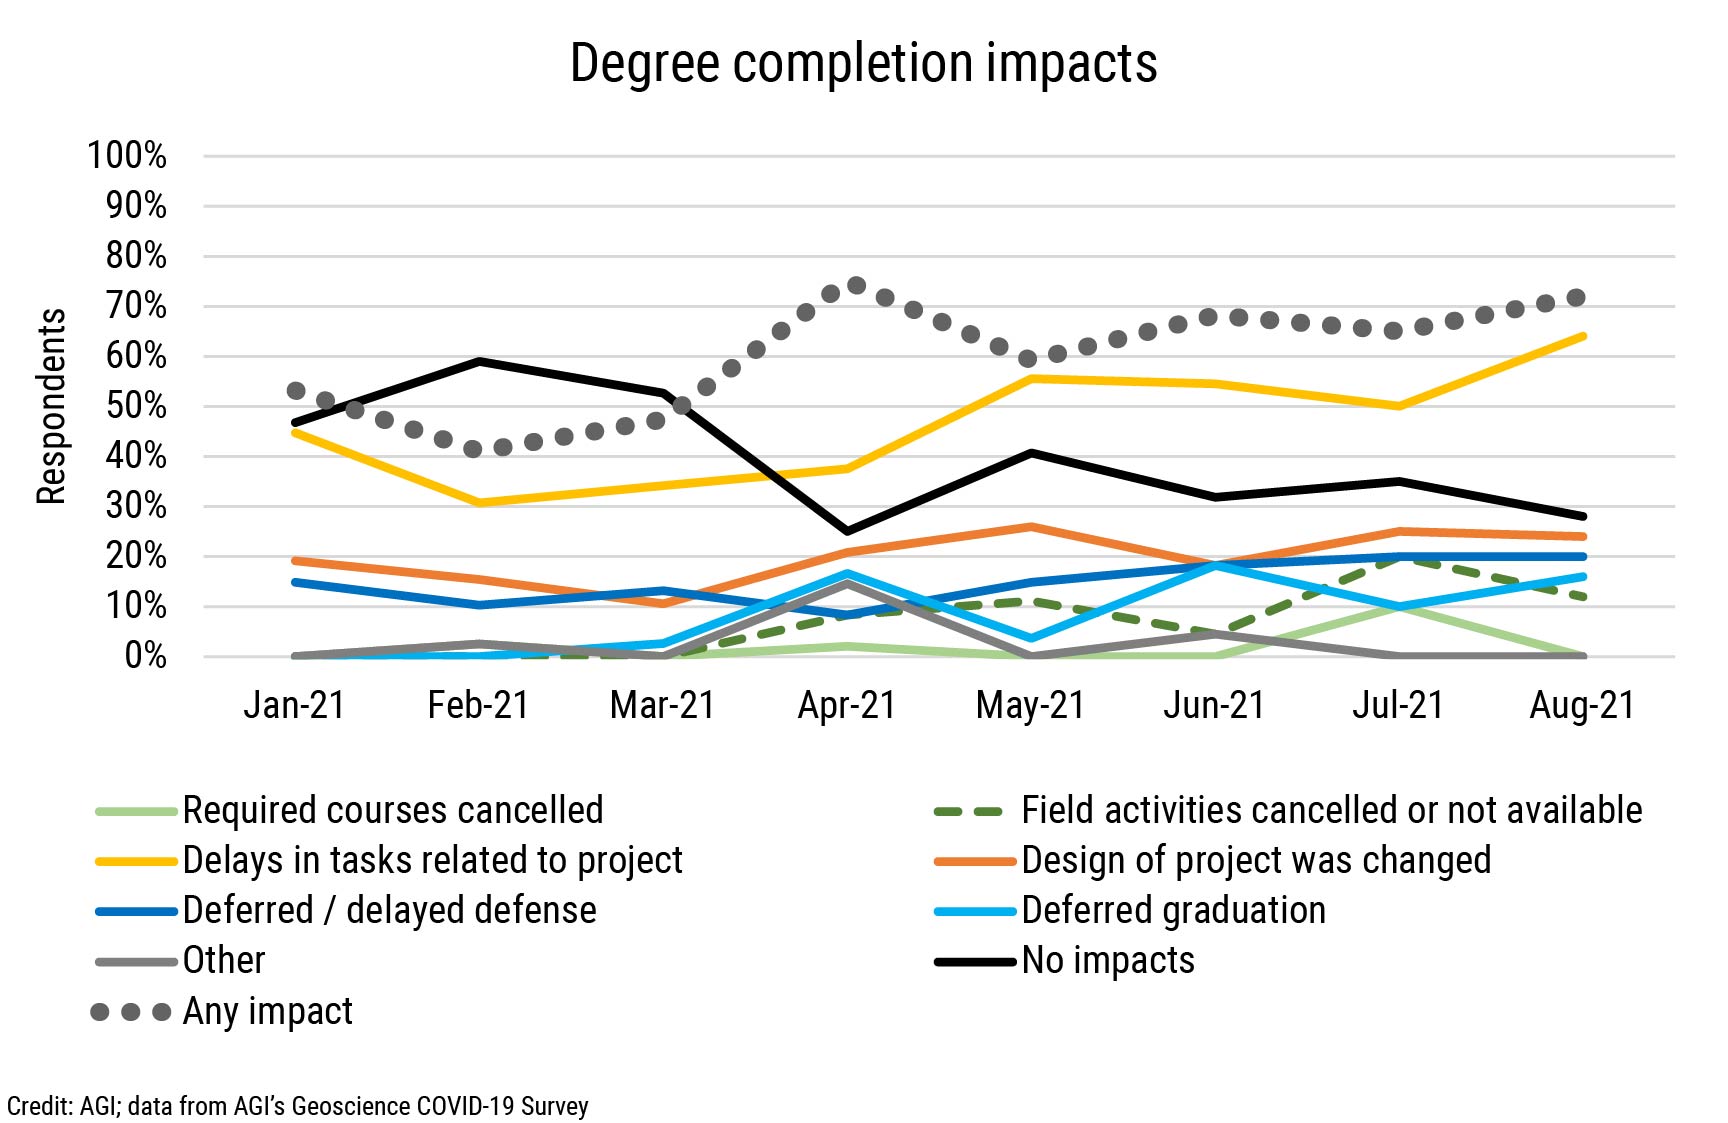 DB_2021-032 chart 02: Degree completion impacts (Credit: AGI; data from AGI's Geoscience COVID-19 Survey)